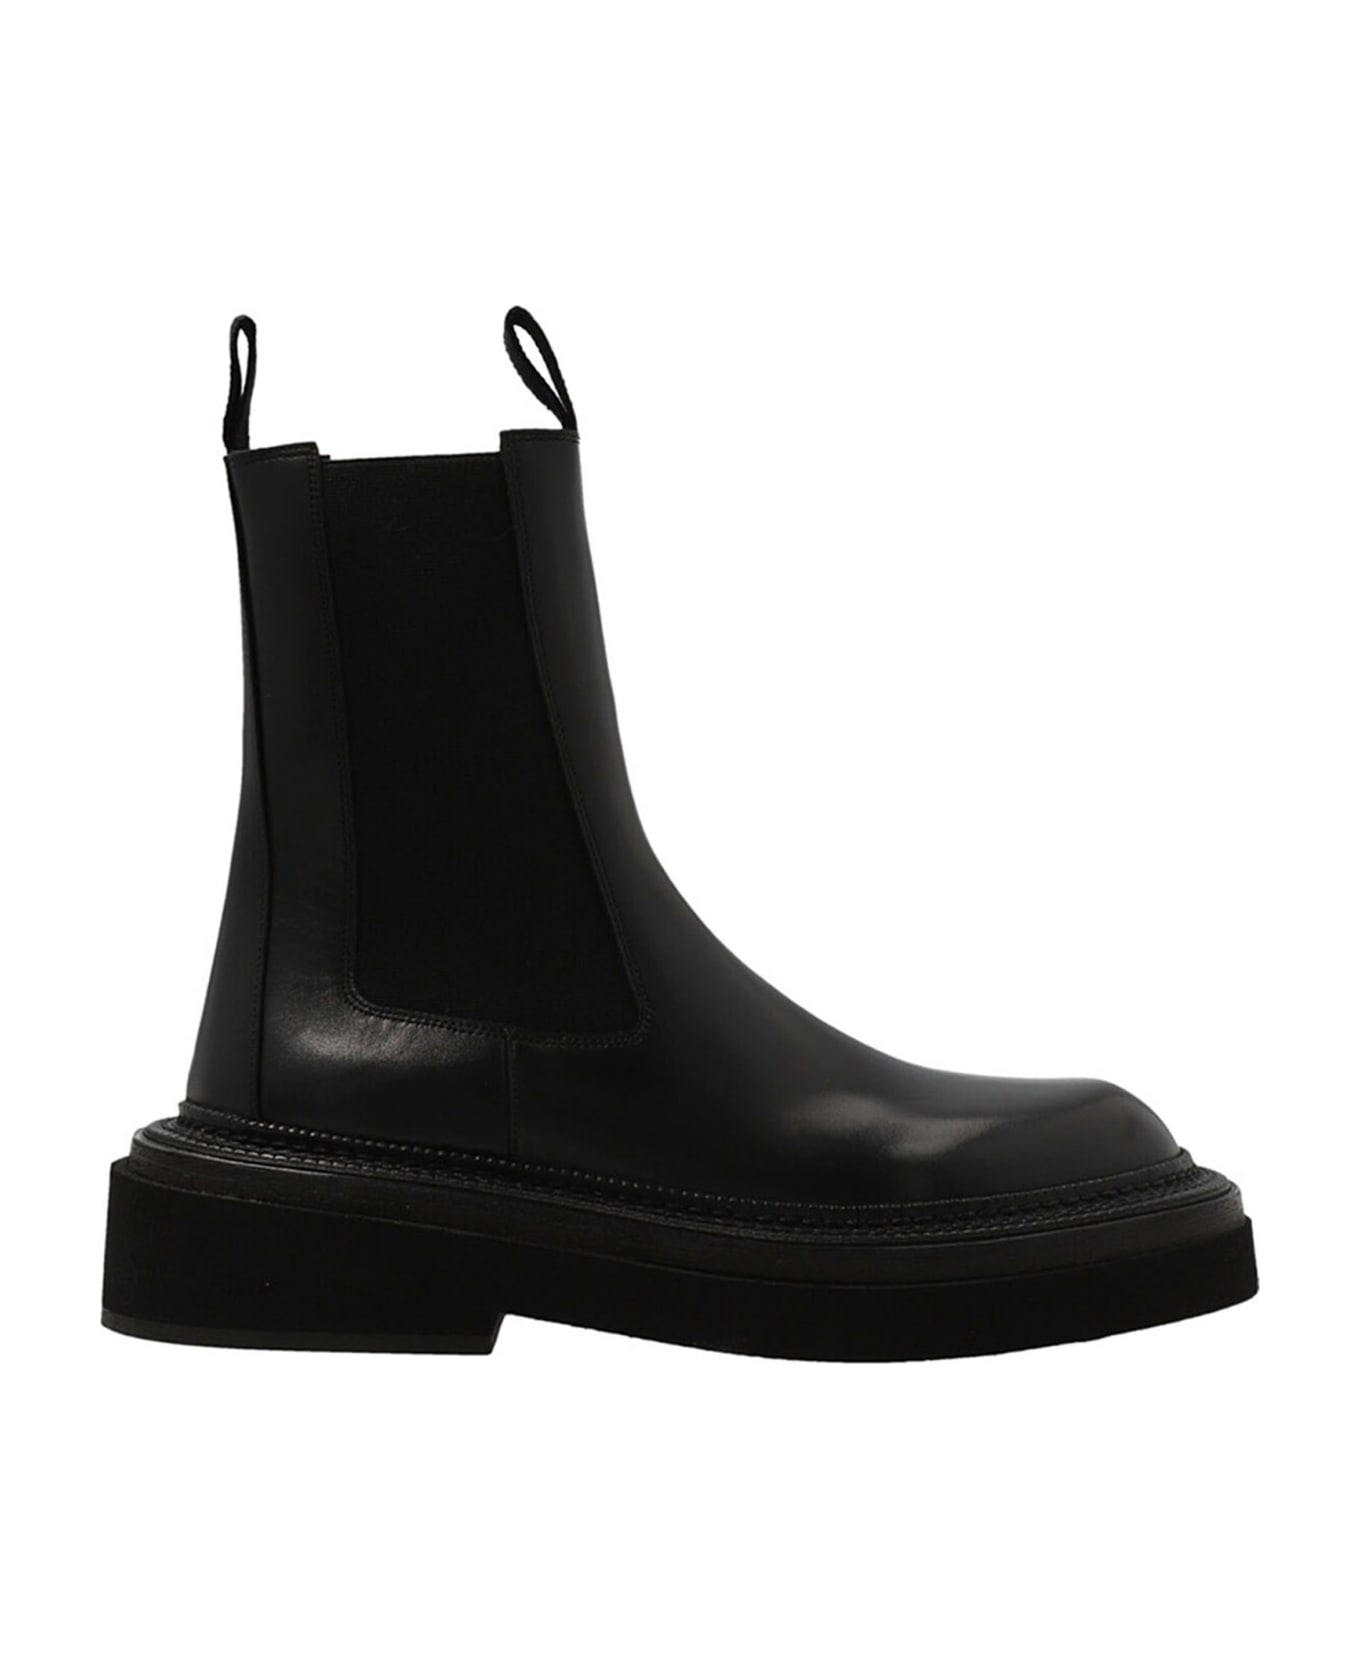 Marsell 'pollicione Beatles' Ankle Boots - Black   ブーツ